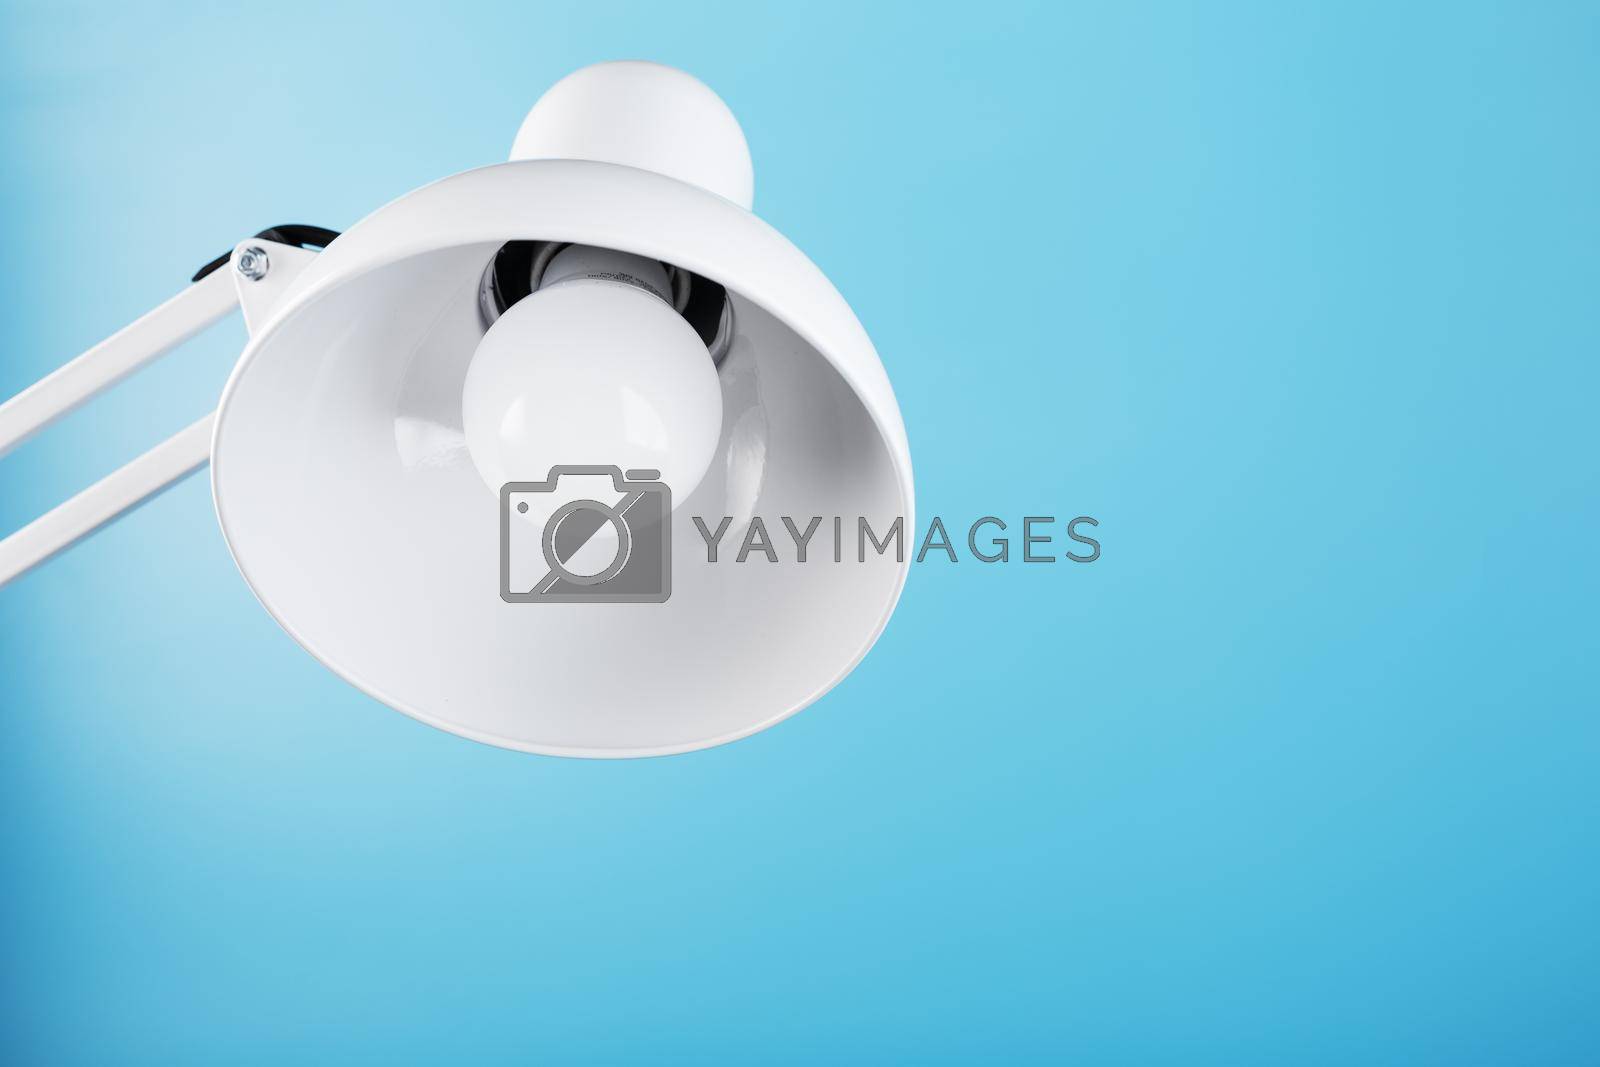 Office table lamp on blue background with space for text and idea concept